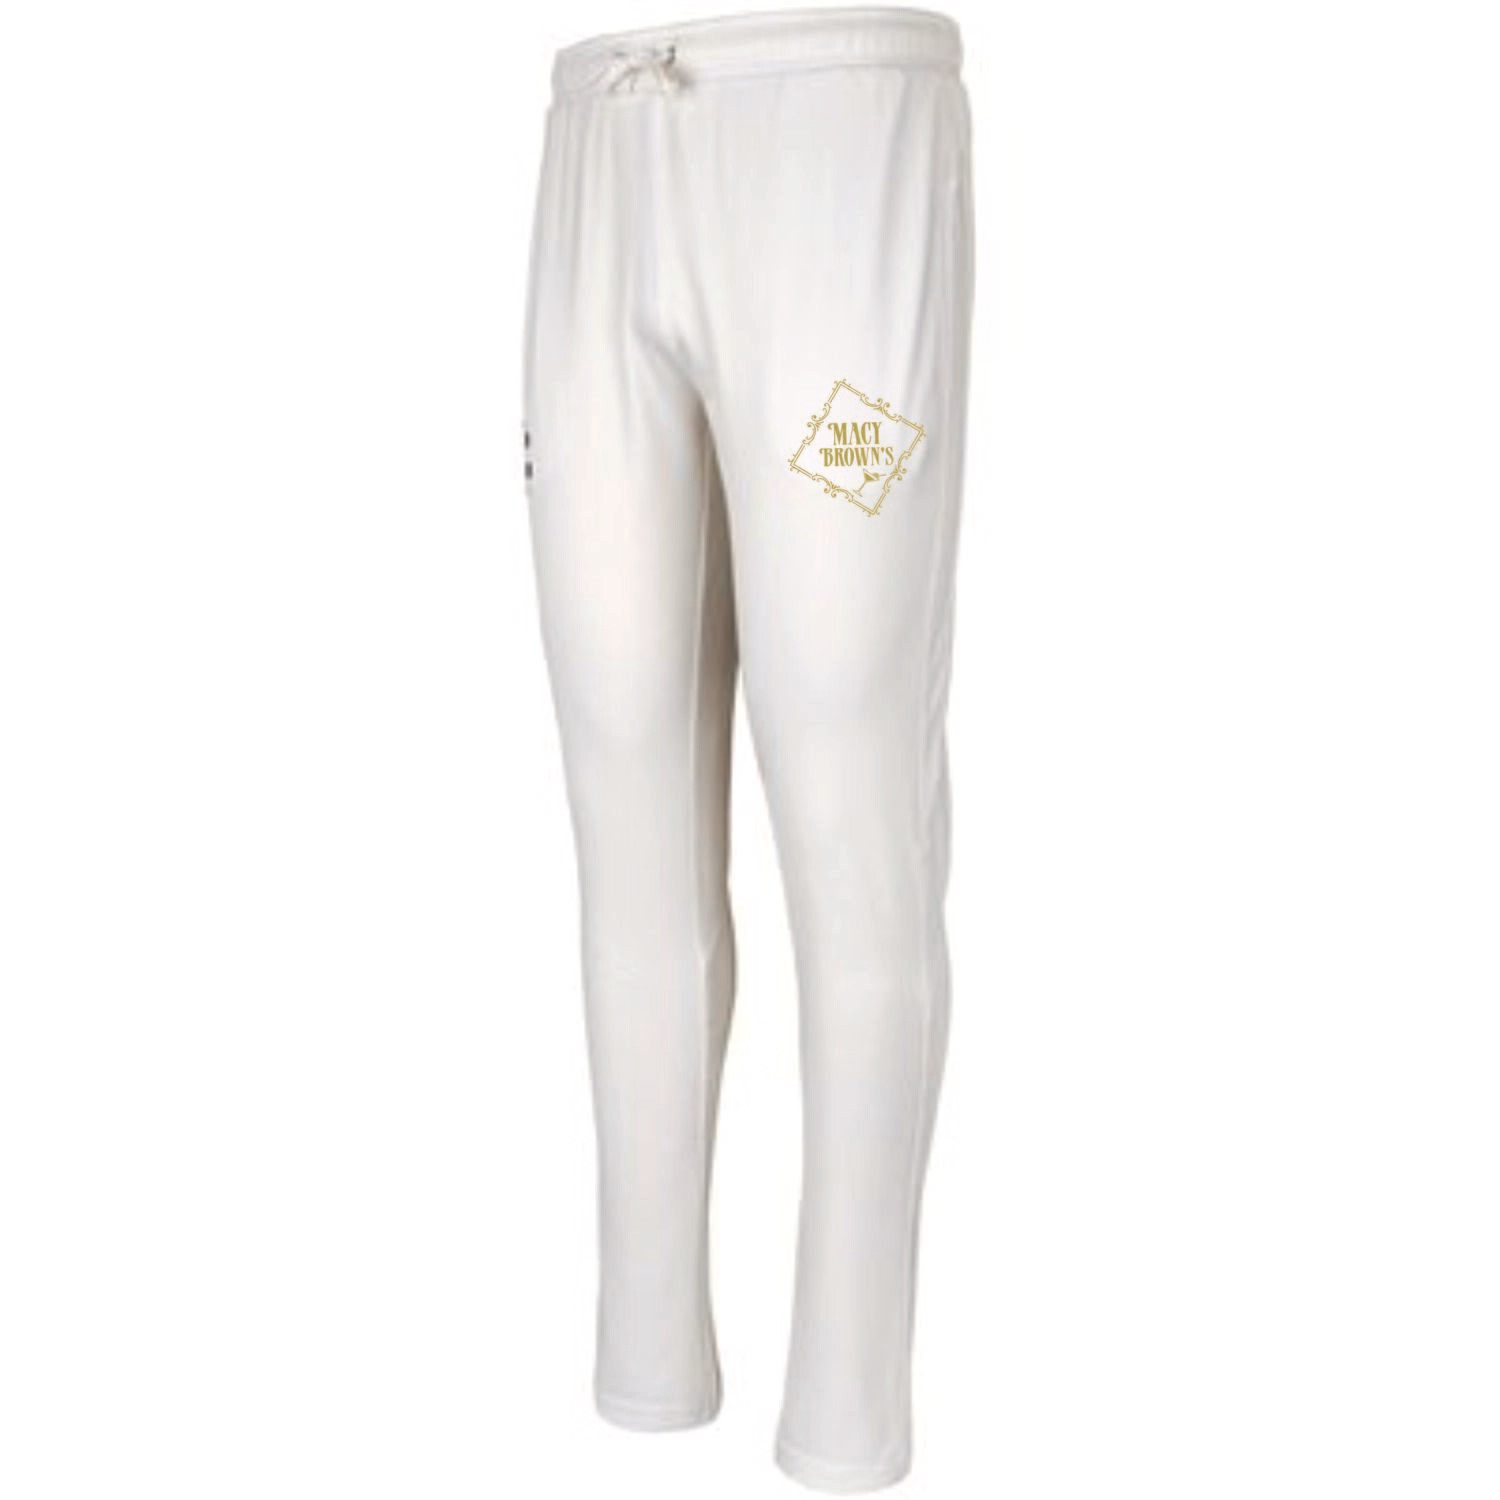 Nunthorpe (Macy Brown's) Pro Performance Cricket Trousers Adult